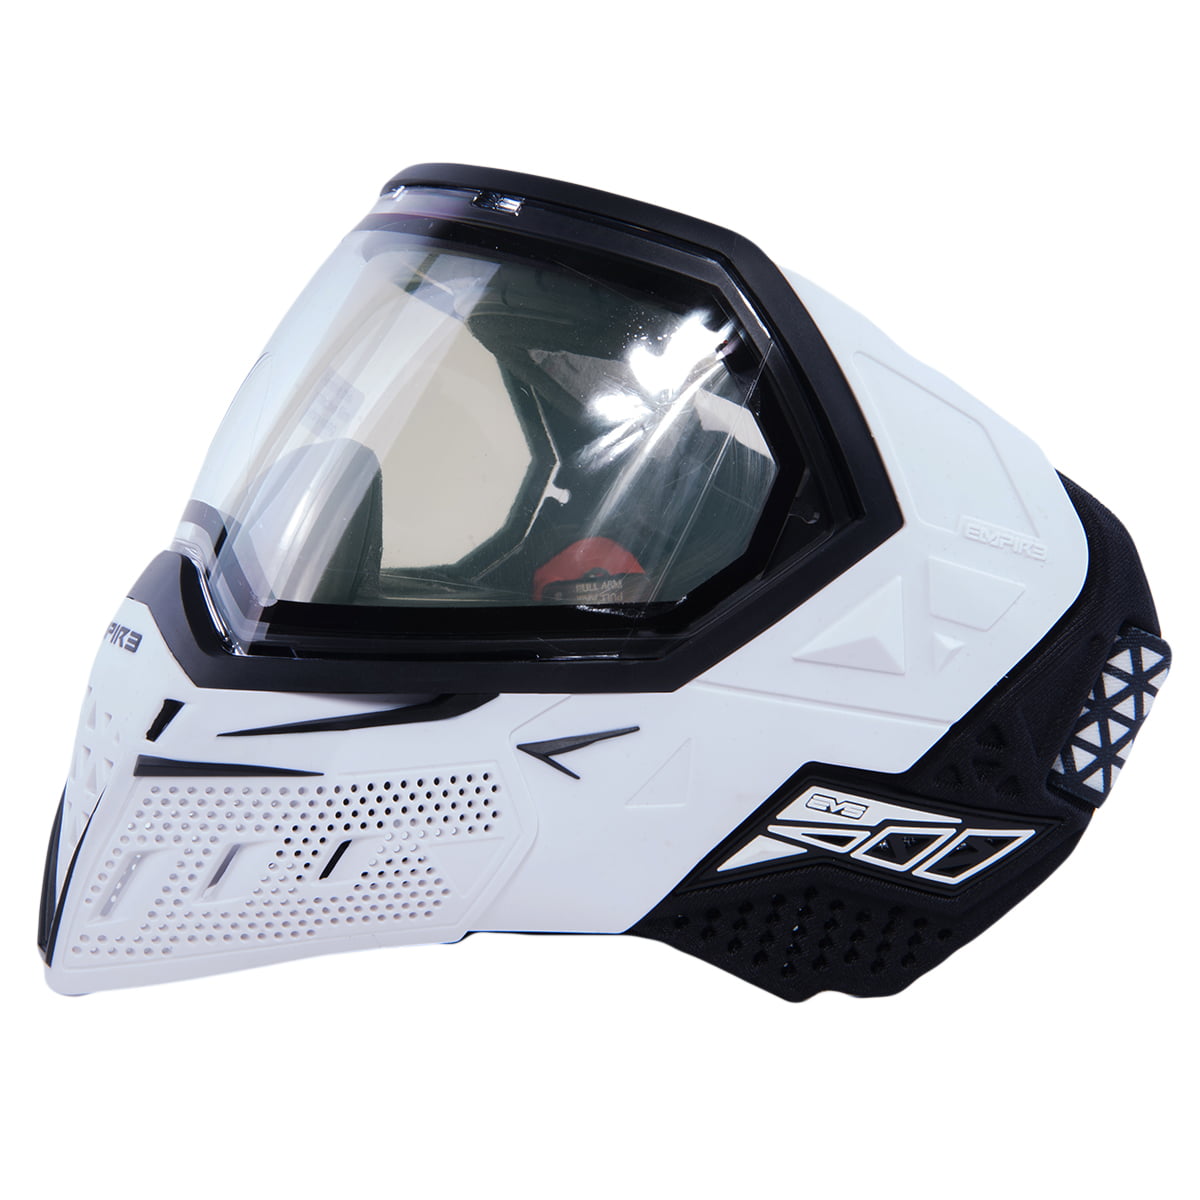 Empire EVS Paintball Airsoft Goggles With Clear & Ninja Lens Black White 